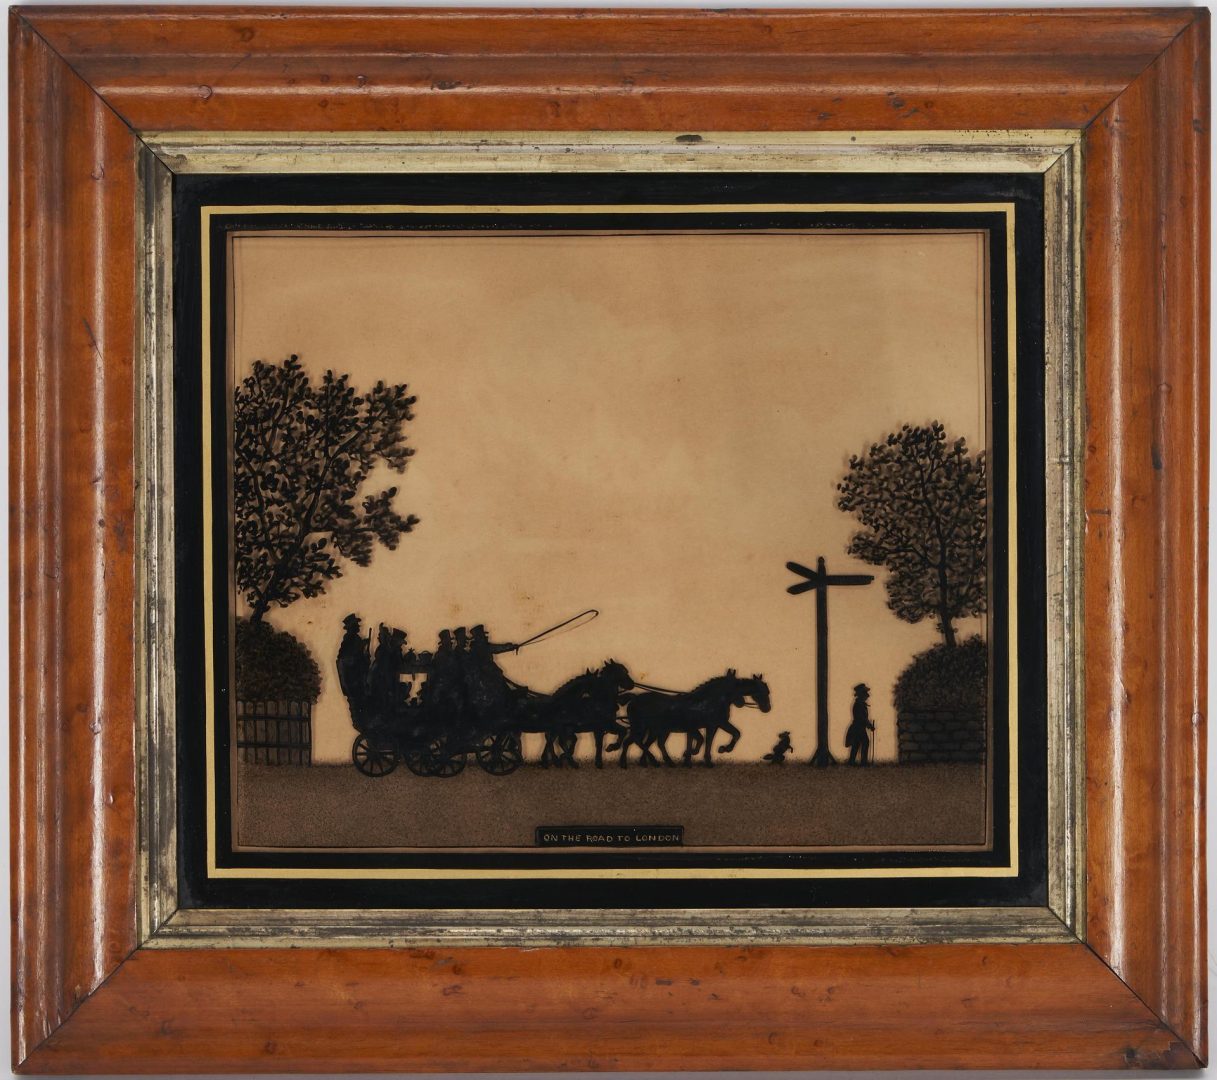 Lot 583: English Reverse Glass Silhouette "On the Road to London" Landscape